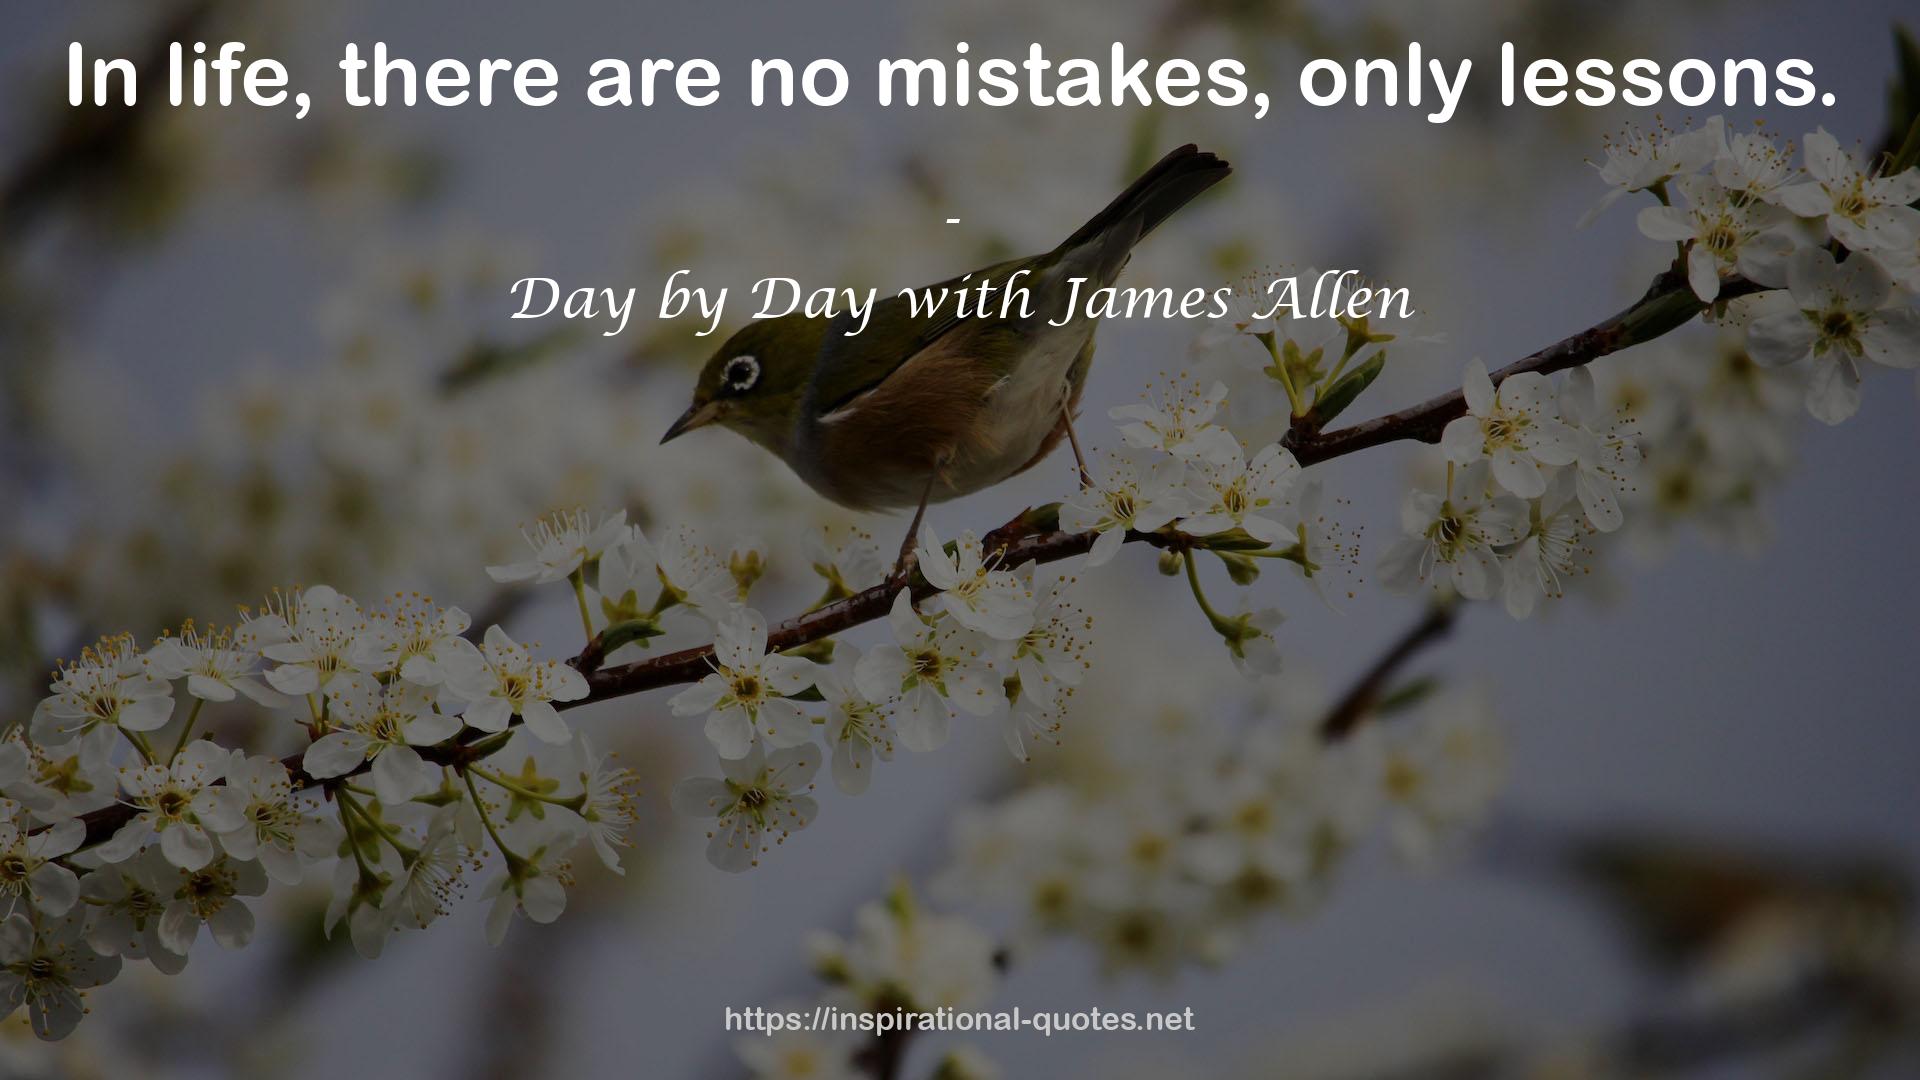 Day by Day with James Allen QUOTES